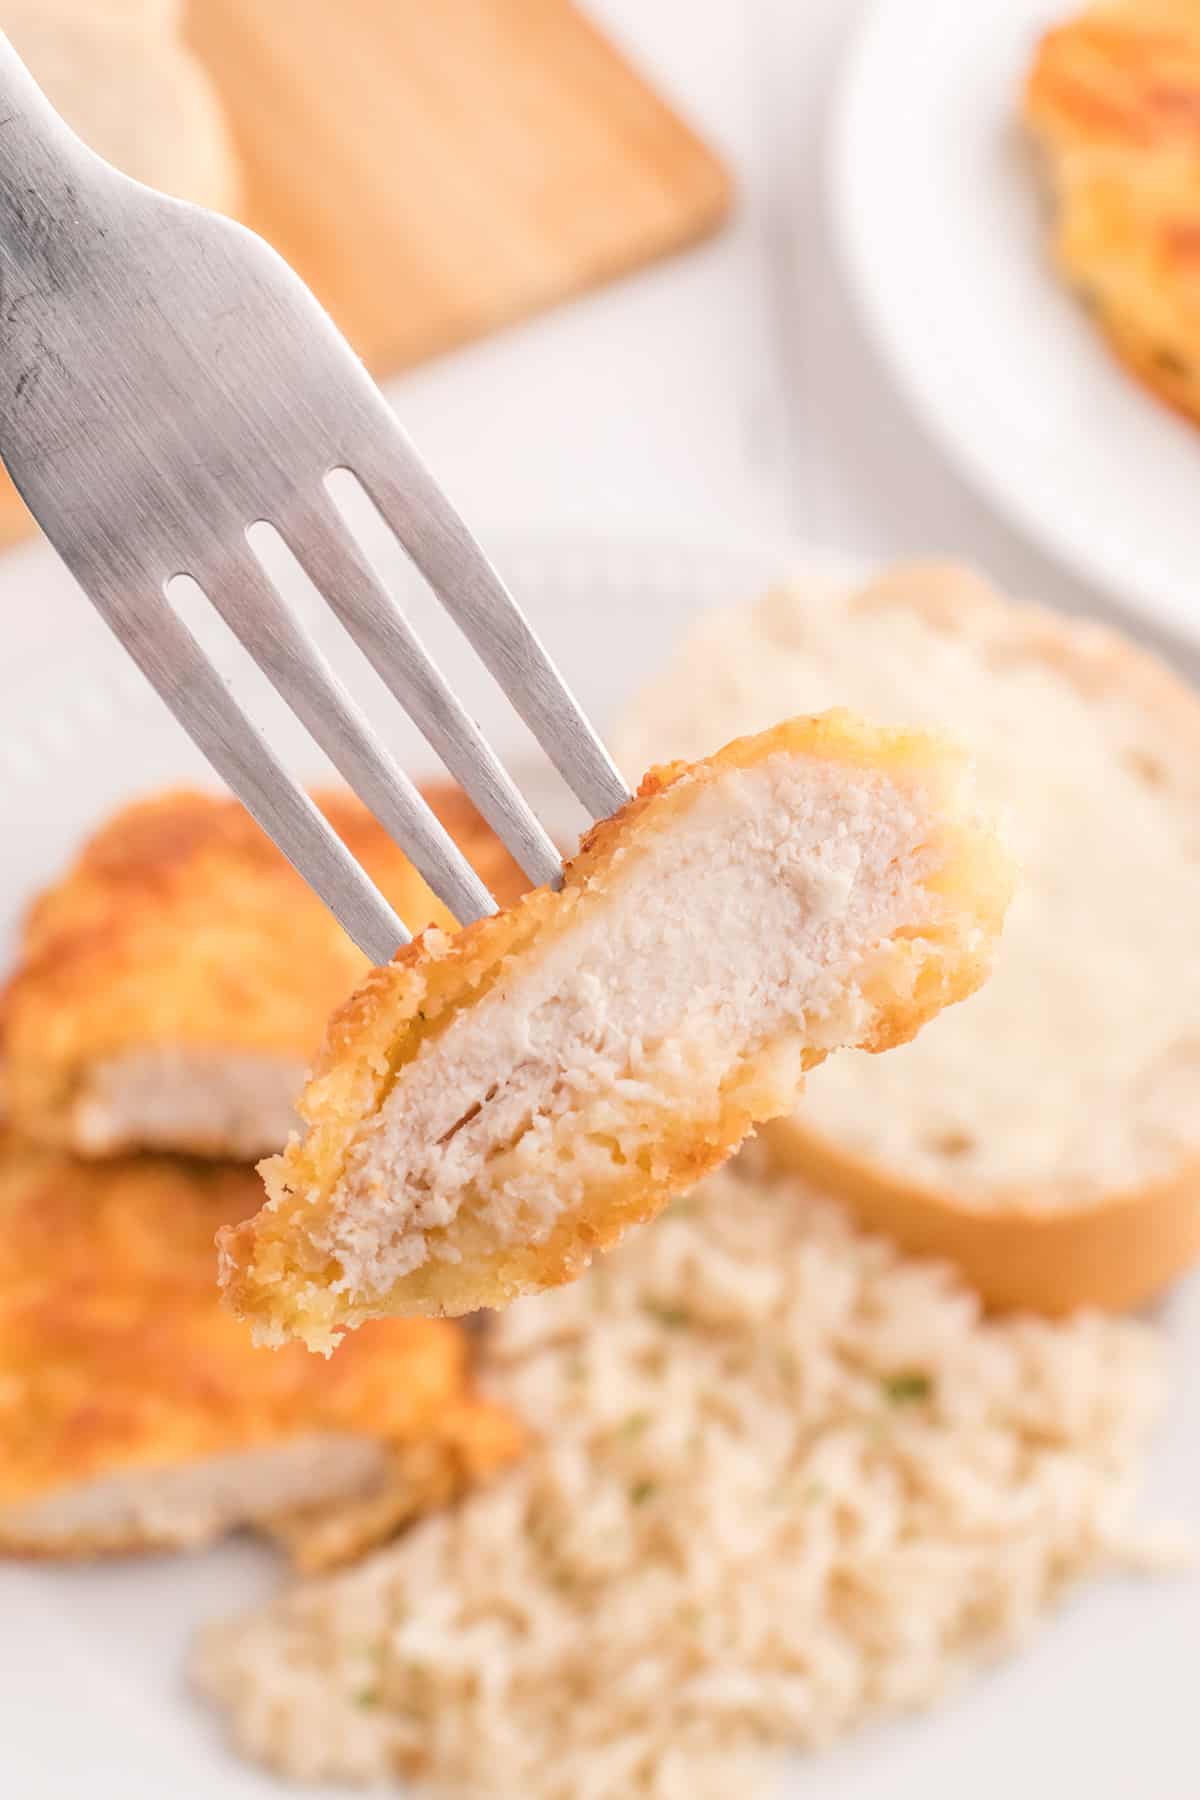 Finished chicken breast on a white plate with rice and roll on the side.